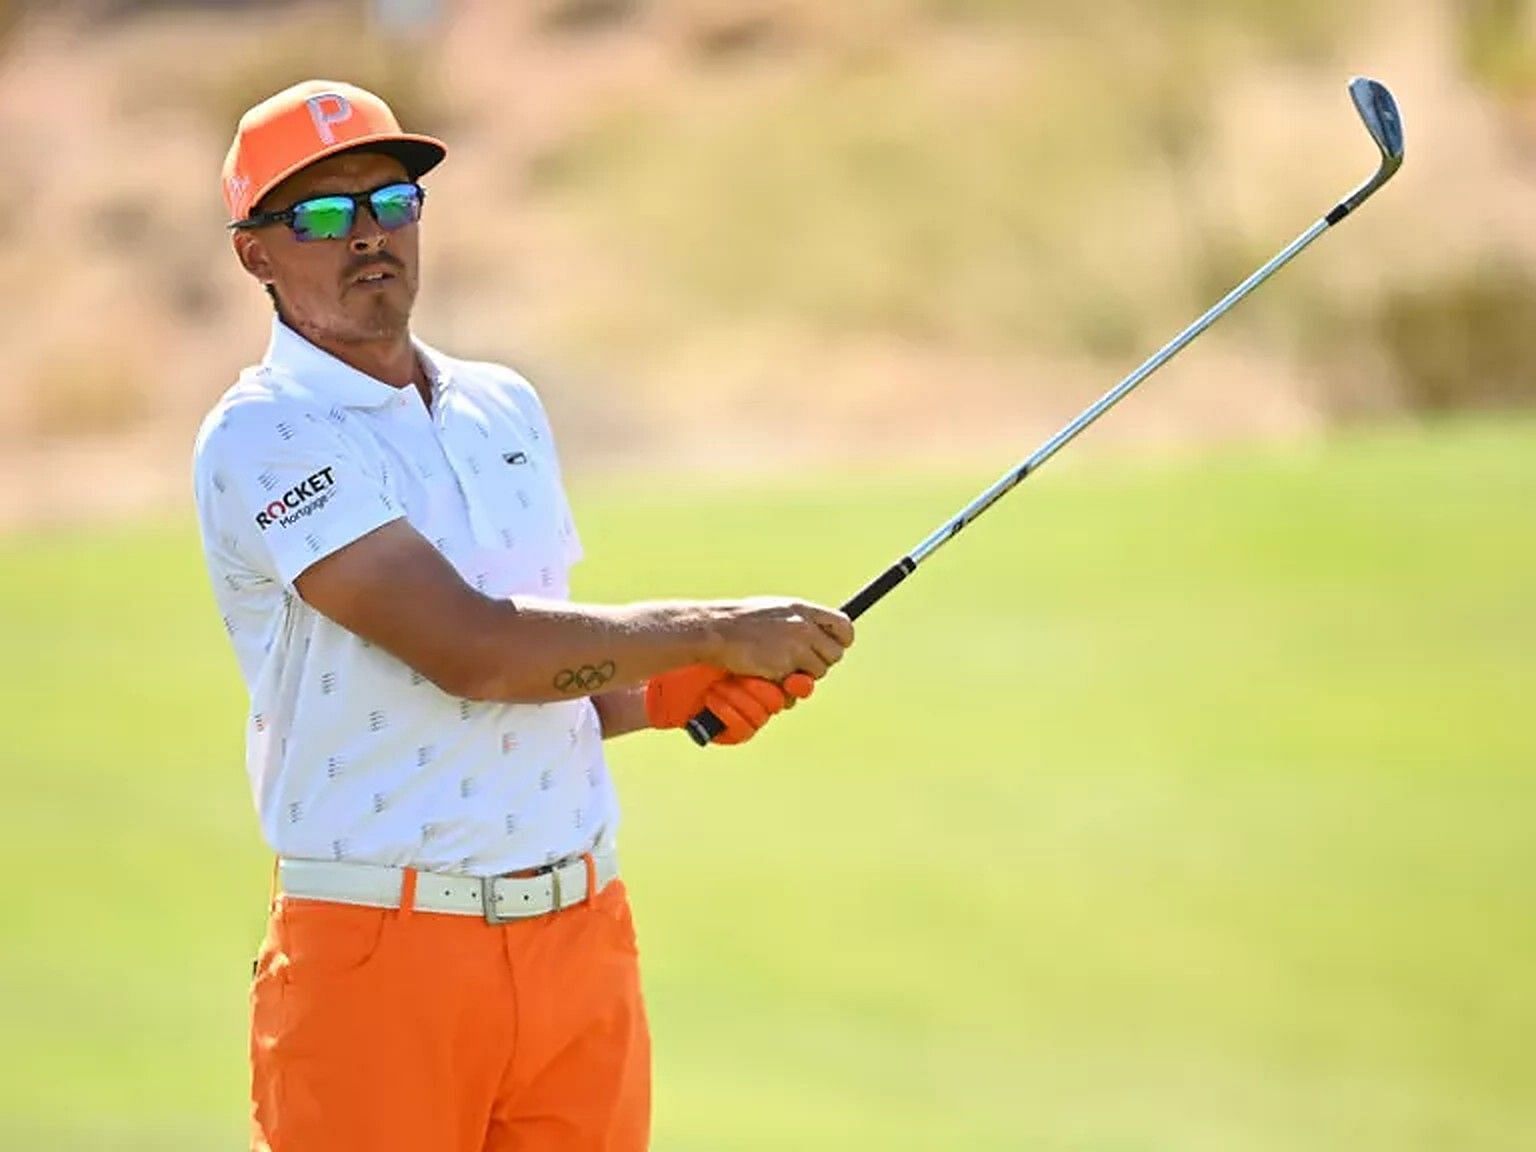 Rickie Fowler is one of the best in the world (Image via Getty)